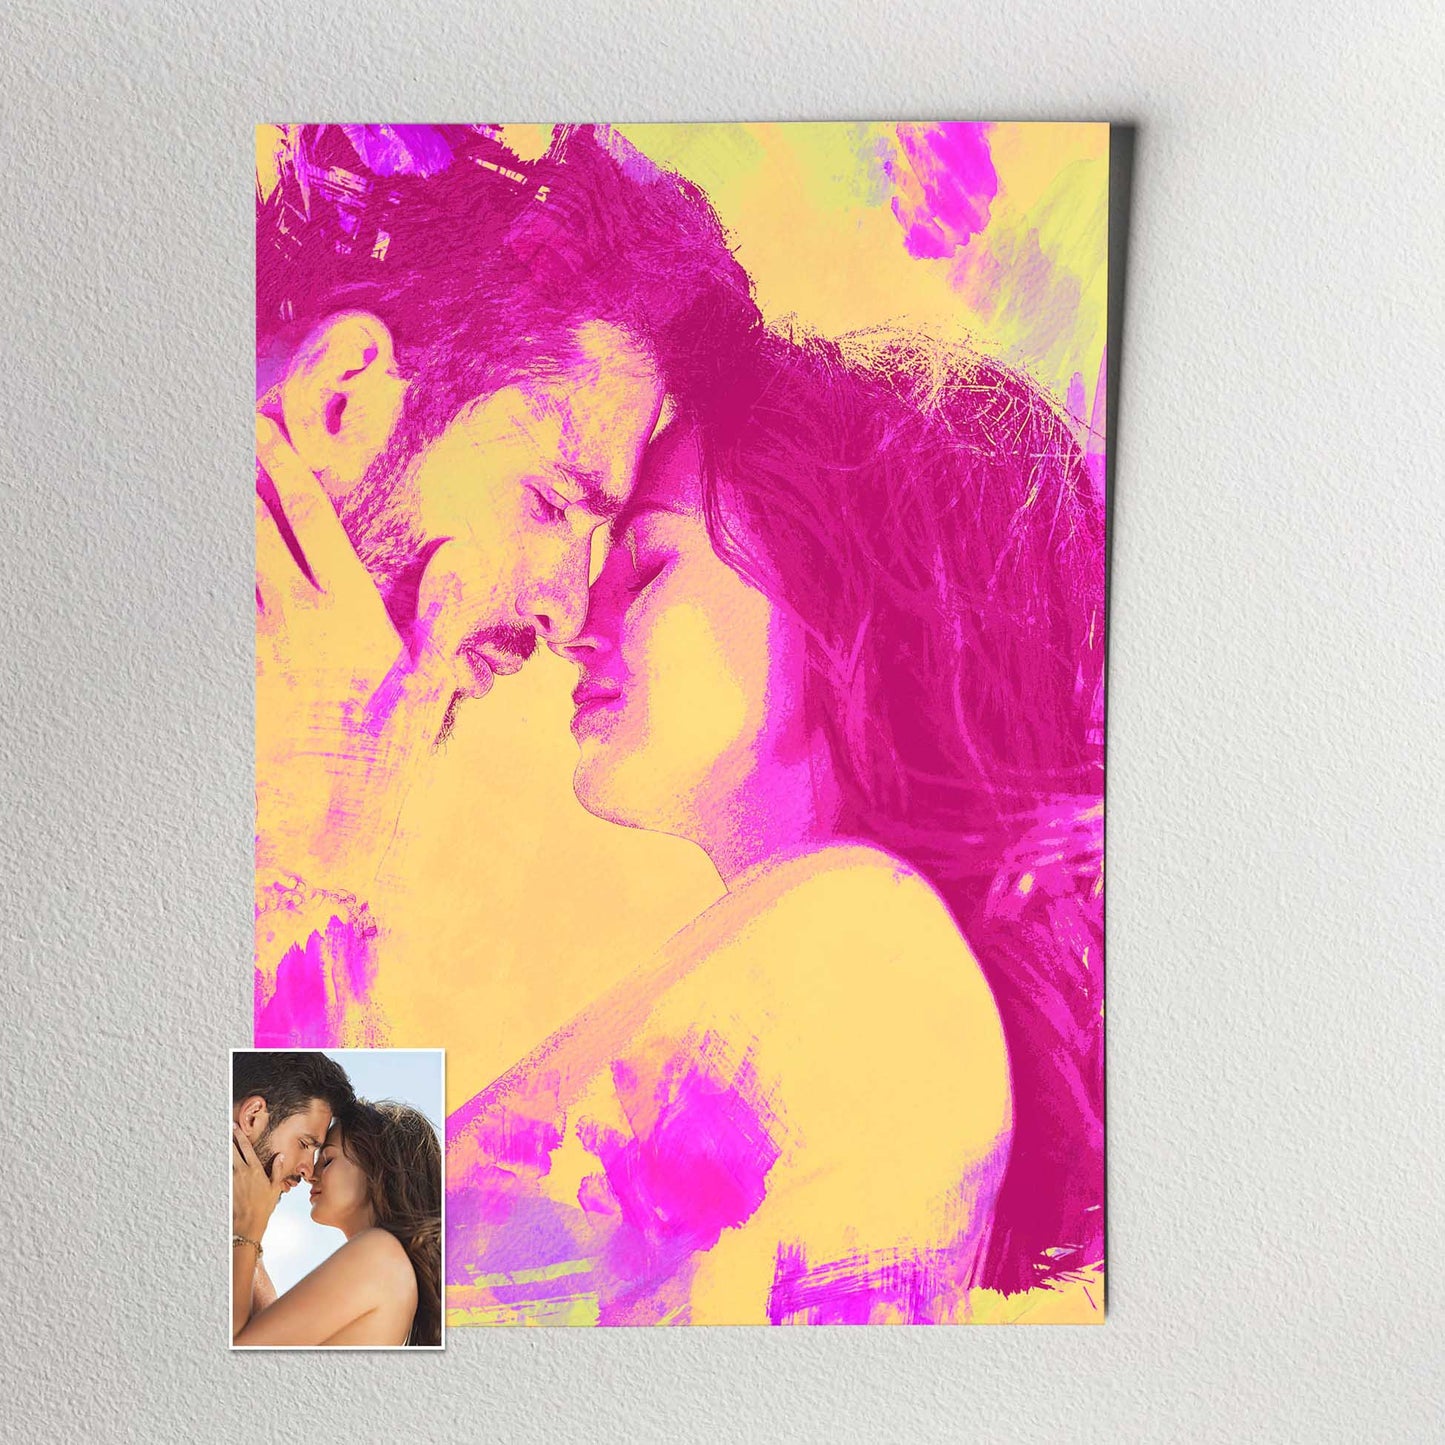 Embrace the creativity of our Personalised Pink & Yellow Watercolor Print. Crafted from your photo using a realistic traditional watercolor style, this unique artwork showcases the beauty of pink and yellow hues